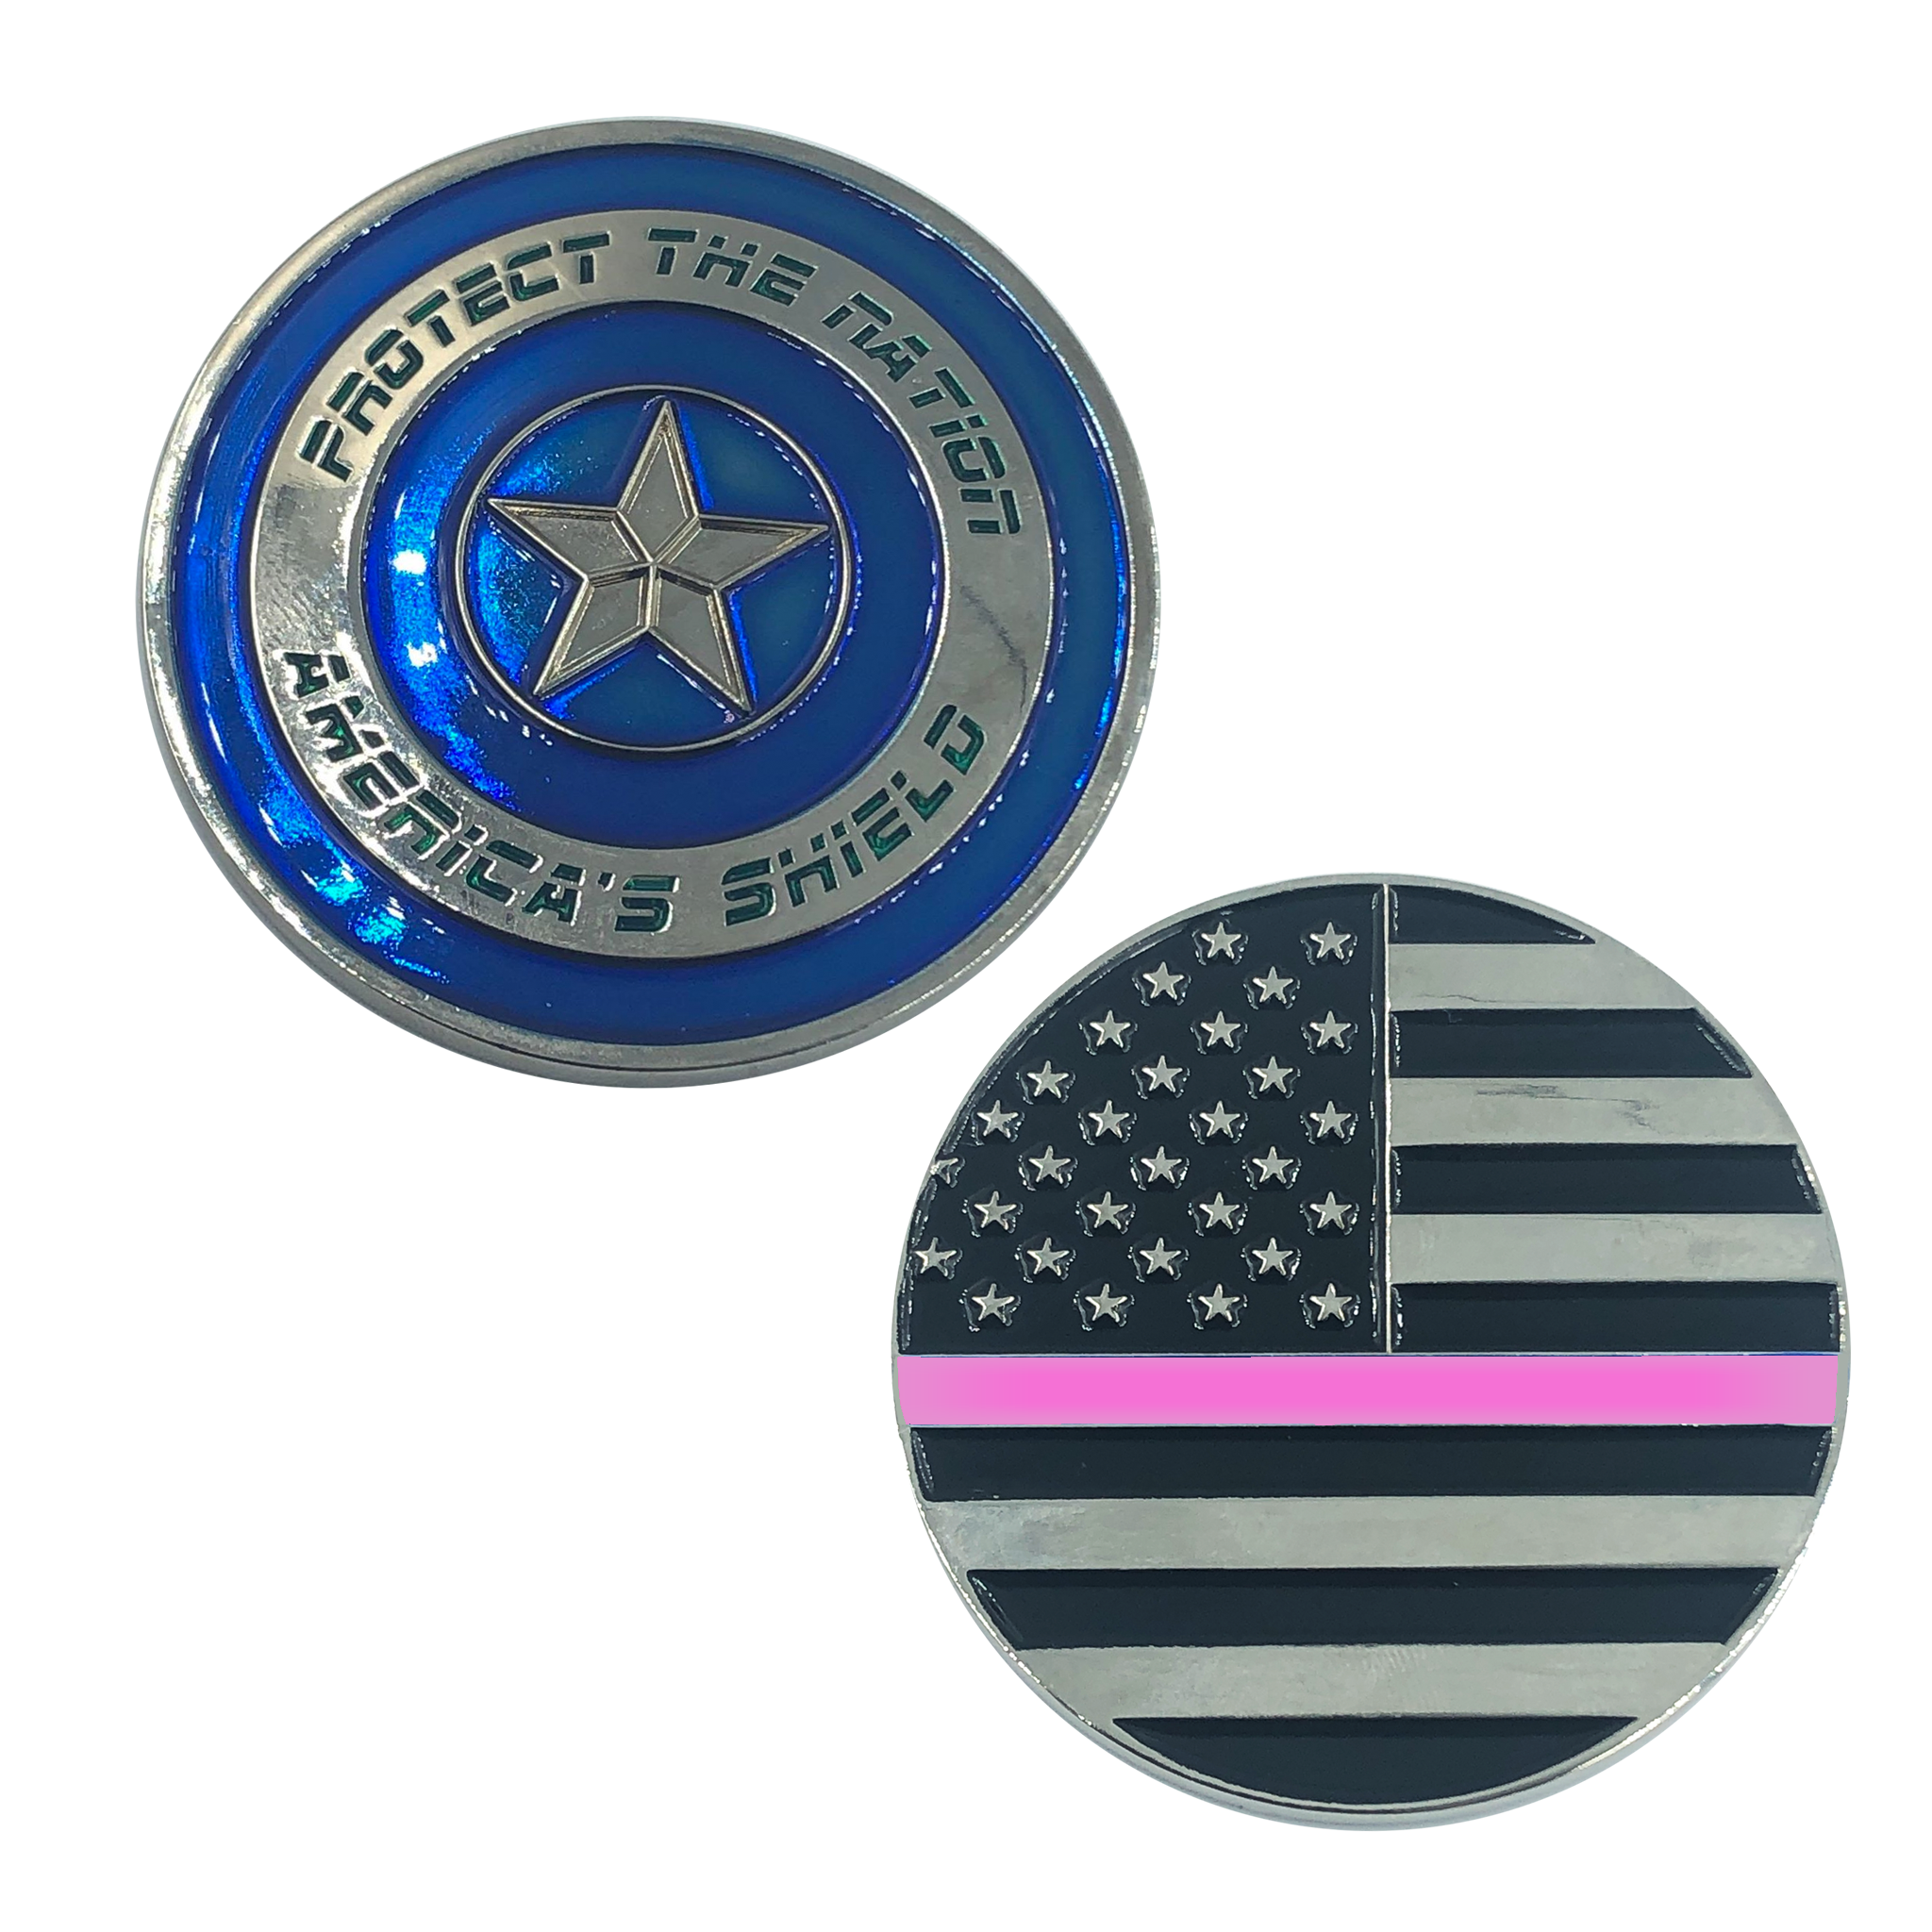 BL6-020 Thin PINK Captain America Shield Police BREAST CANCER AWARENESS CBP NYPD ATF LAPD Federal Agent